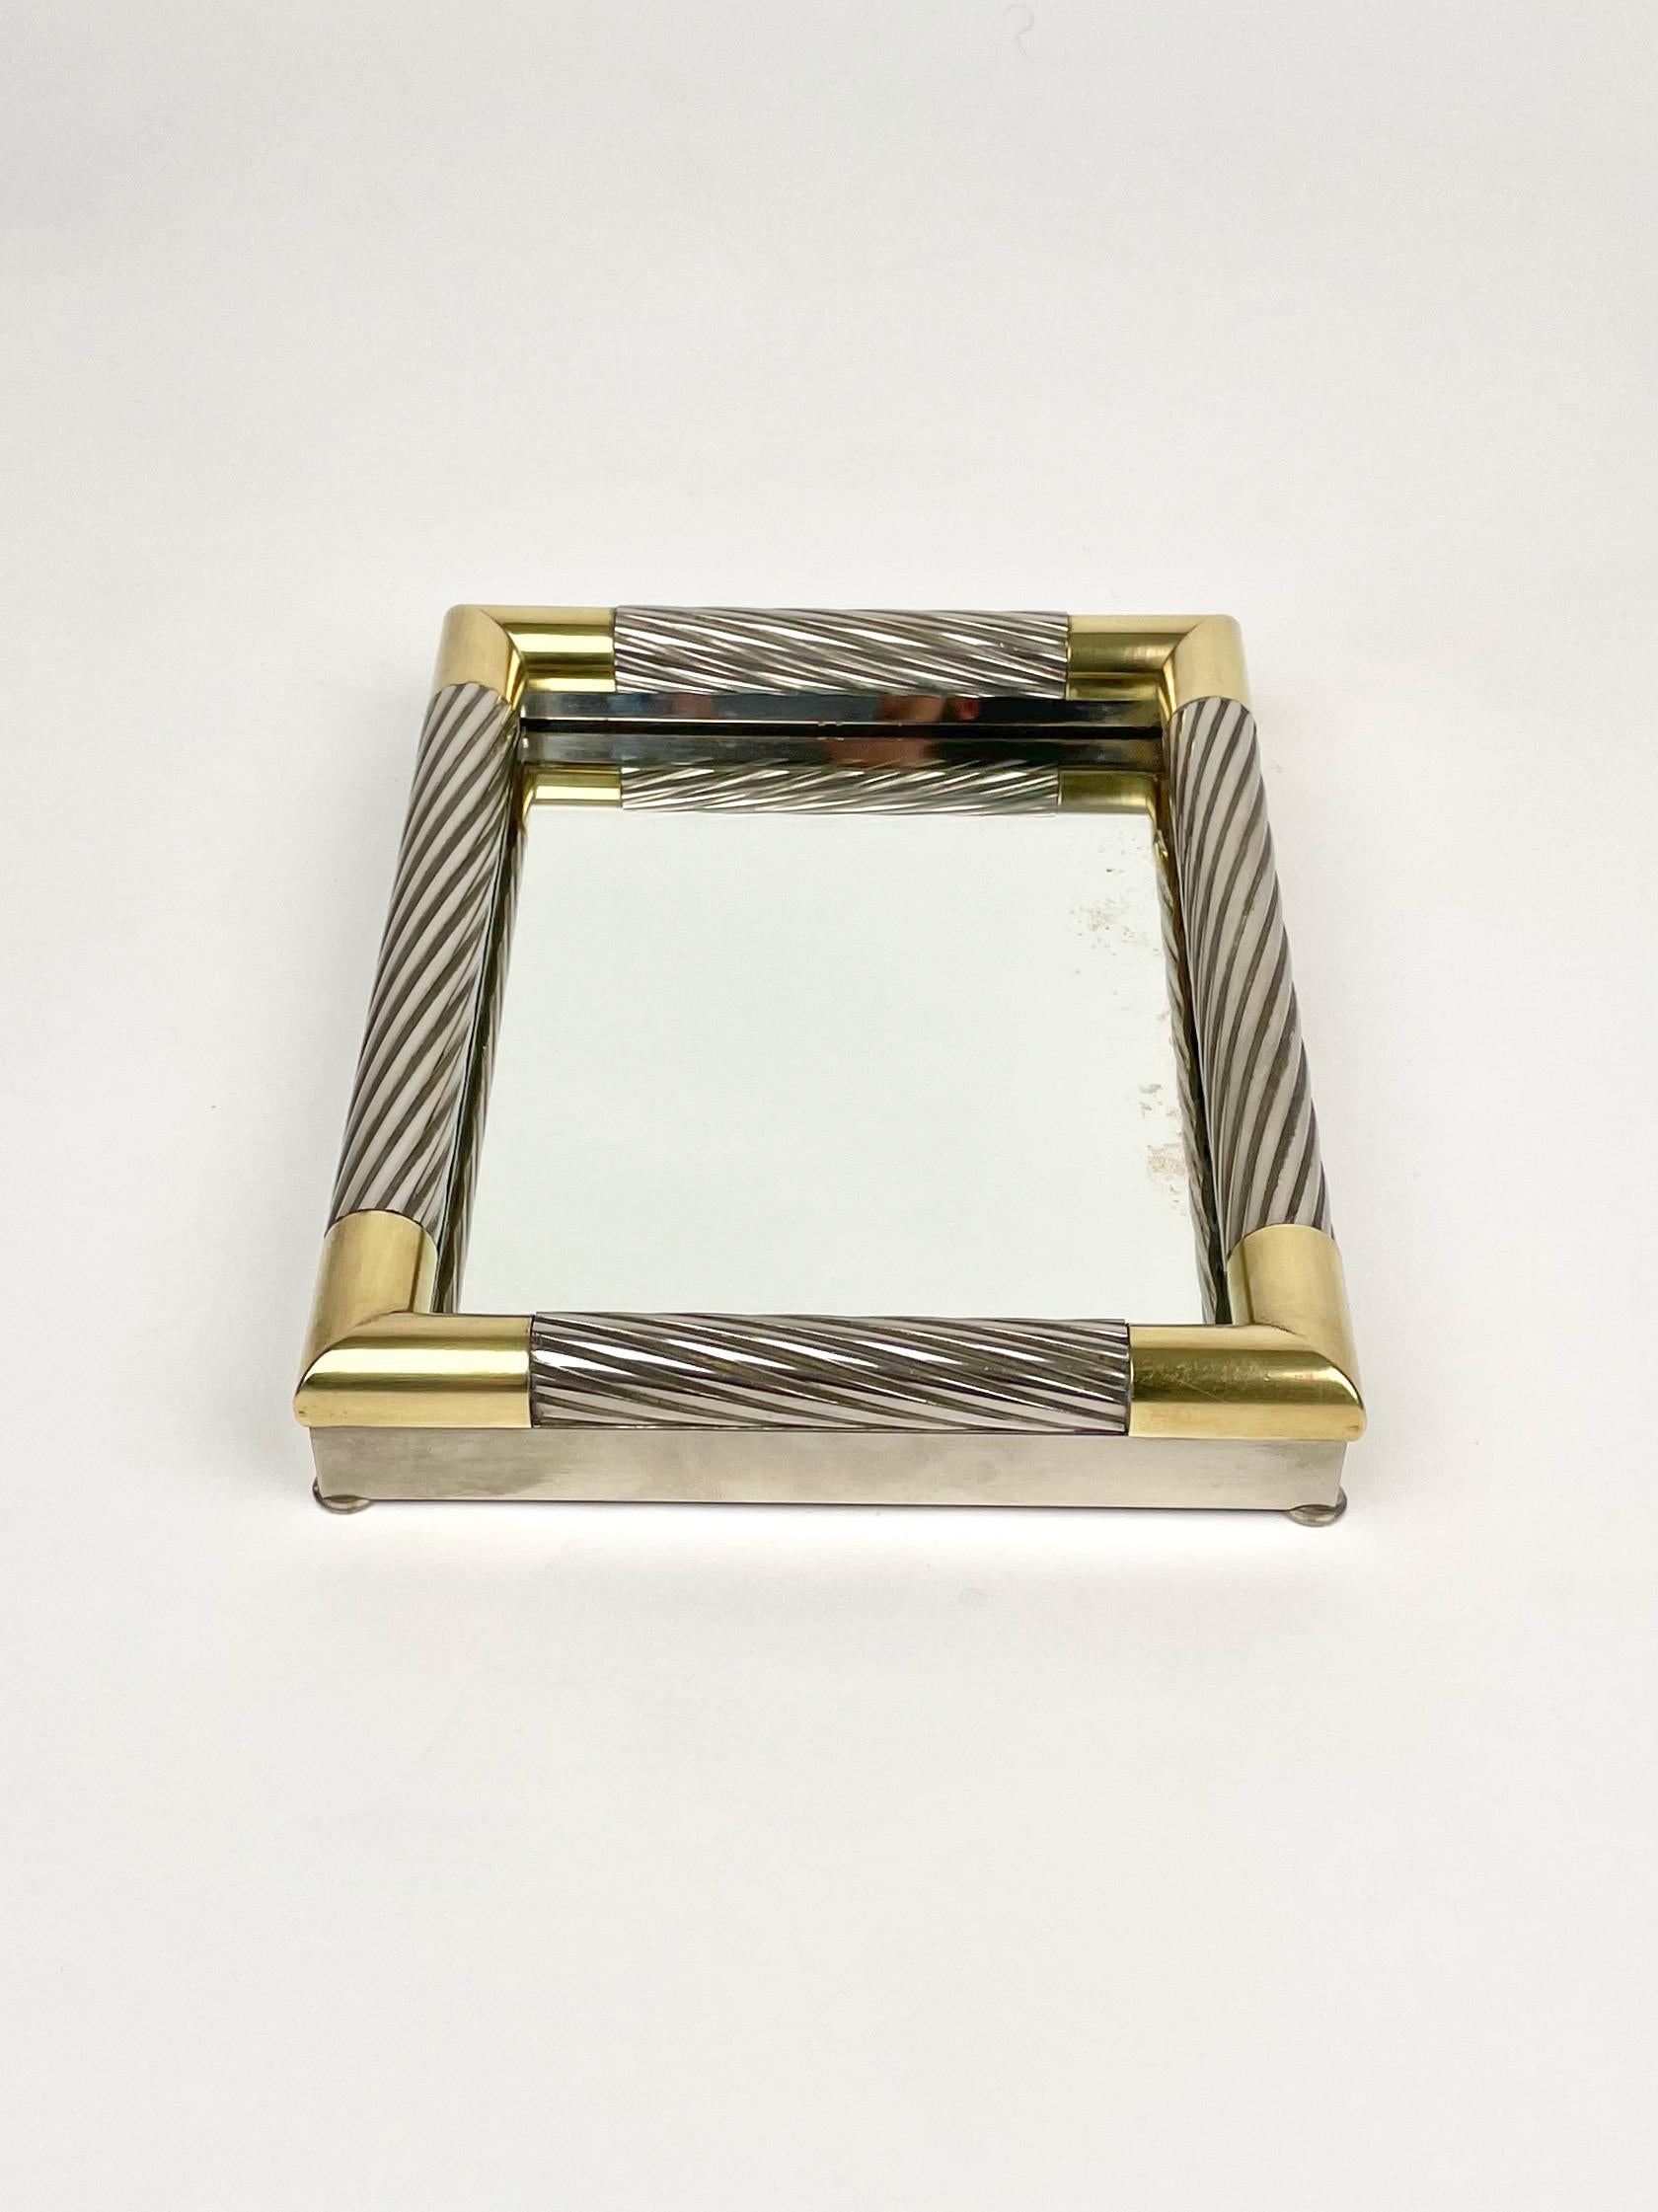 Vide-Poche in Silver Metal, Brass and Mirror by Tommaso Barbi, Italy 1970s For Sale 1